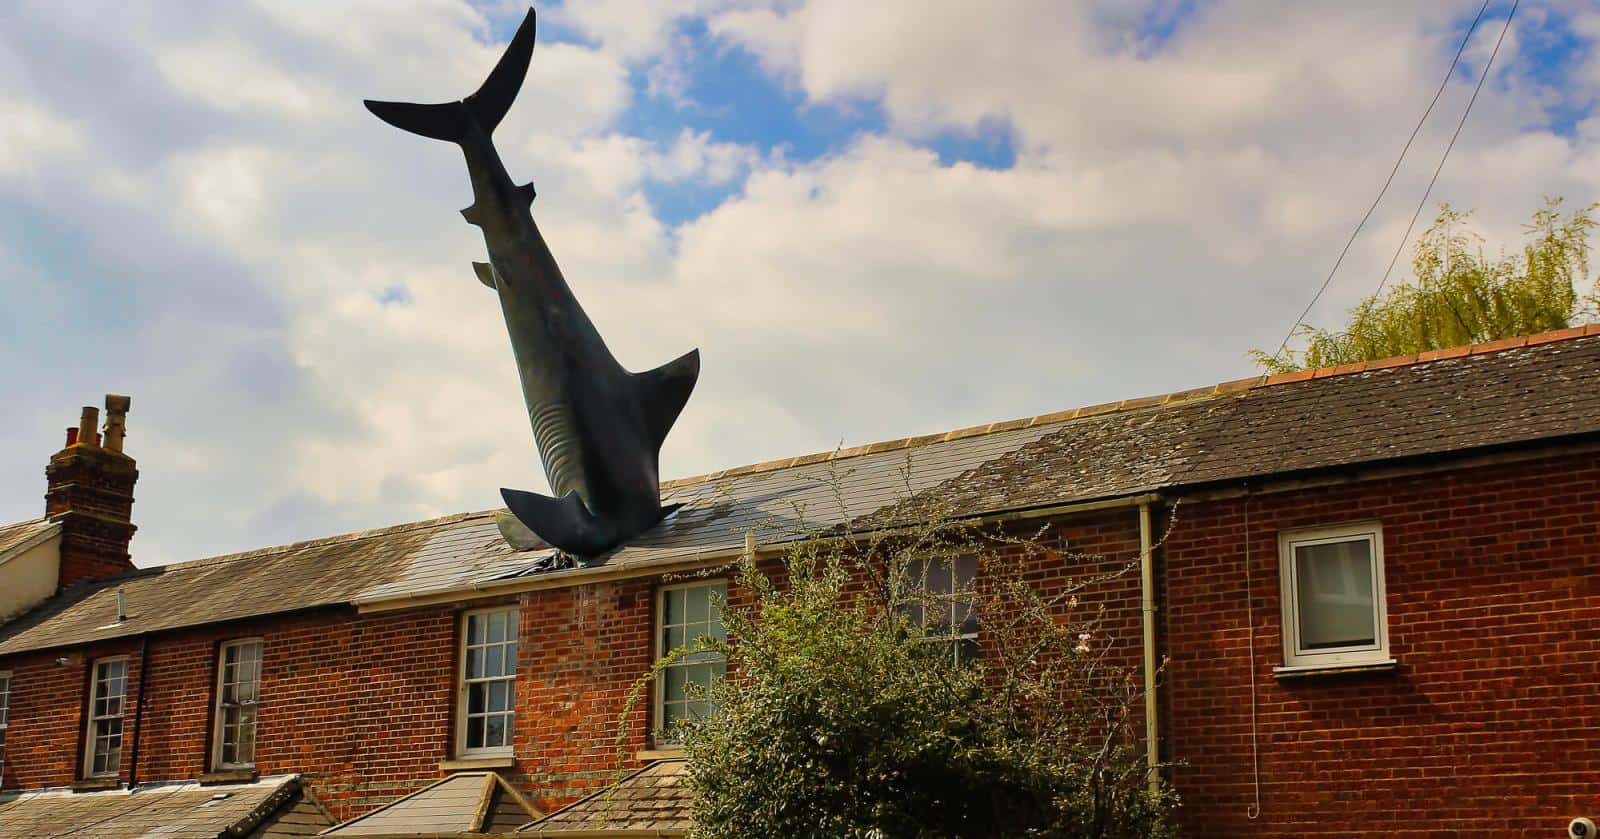 Shark house In Oxford